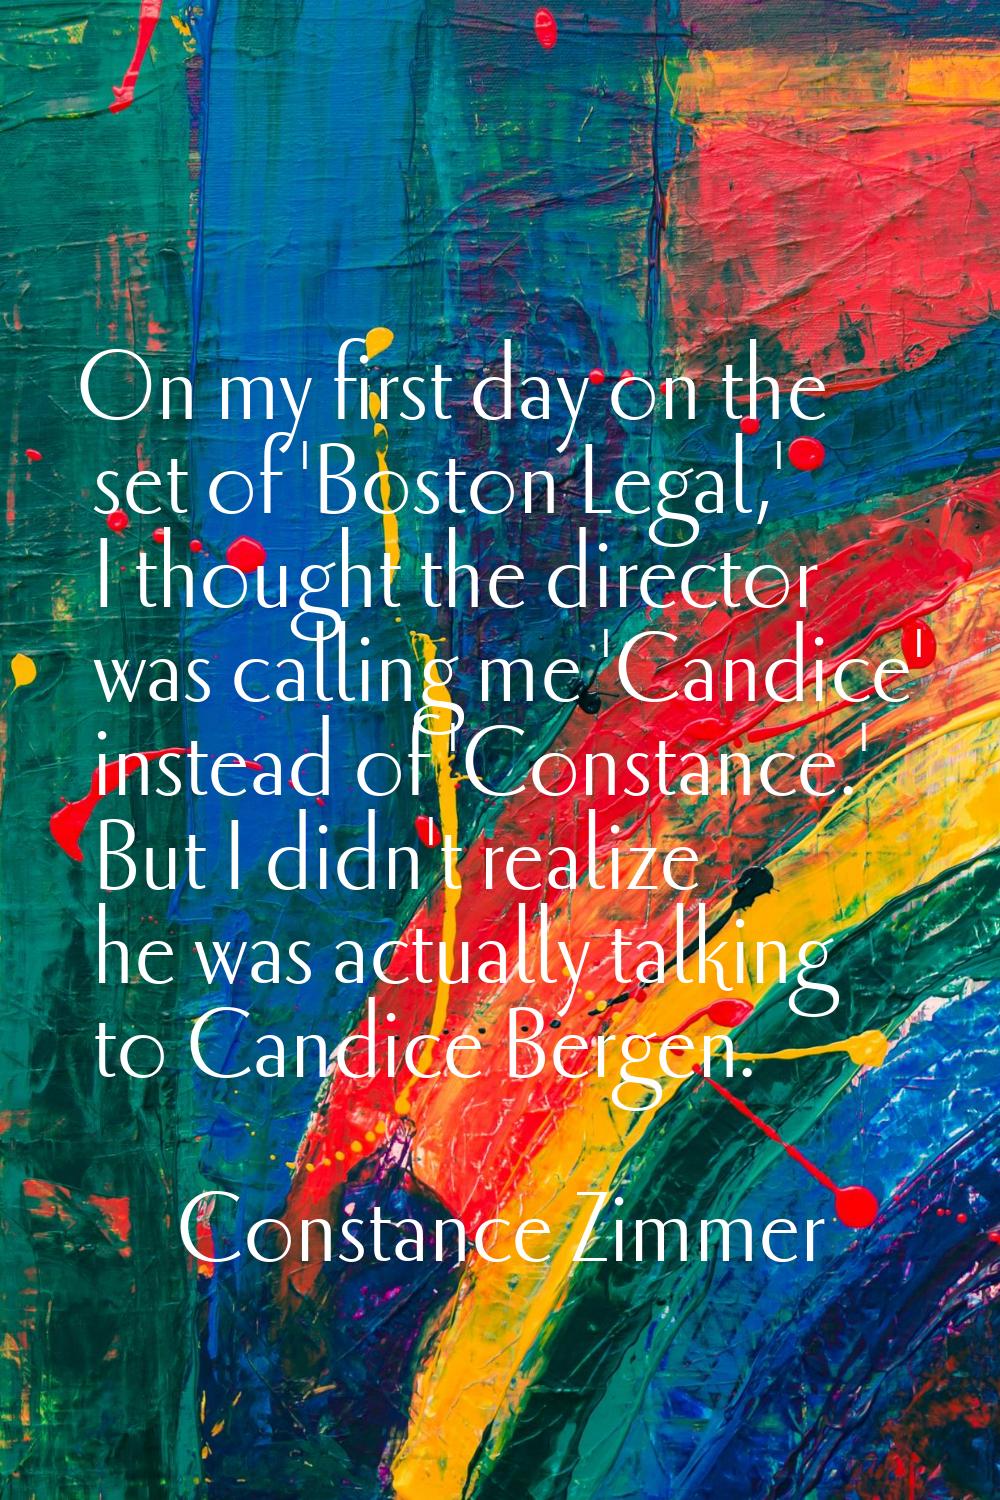 On my first day on the set of 'Boston Legal,' I thought the director was calling me 'Candice' inste